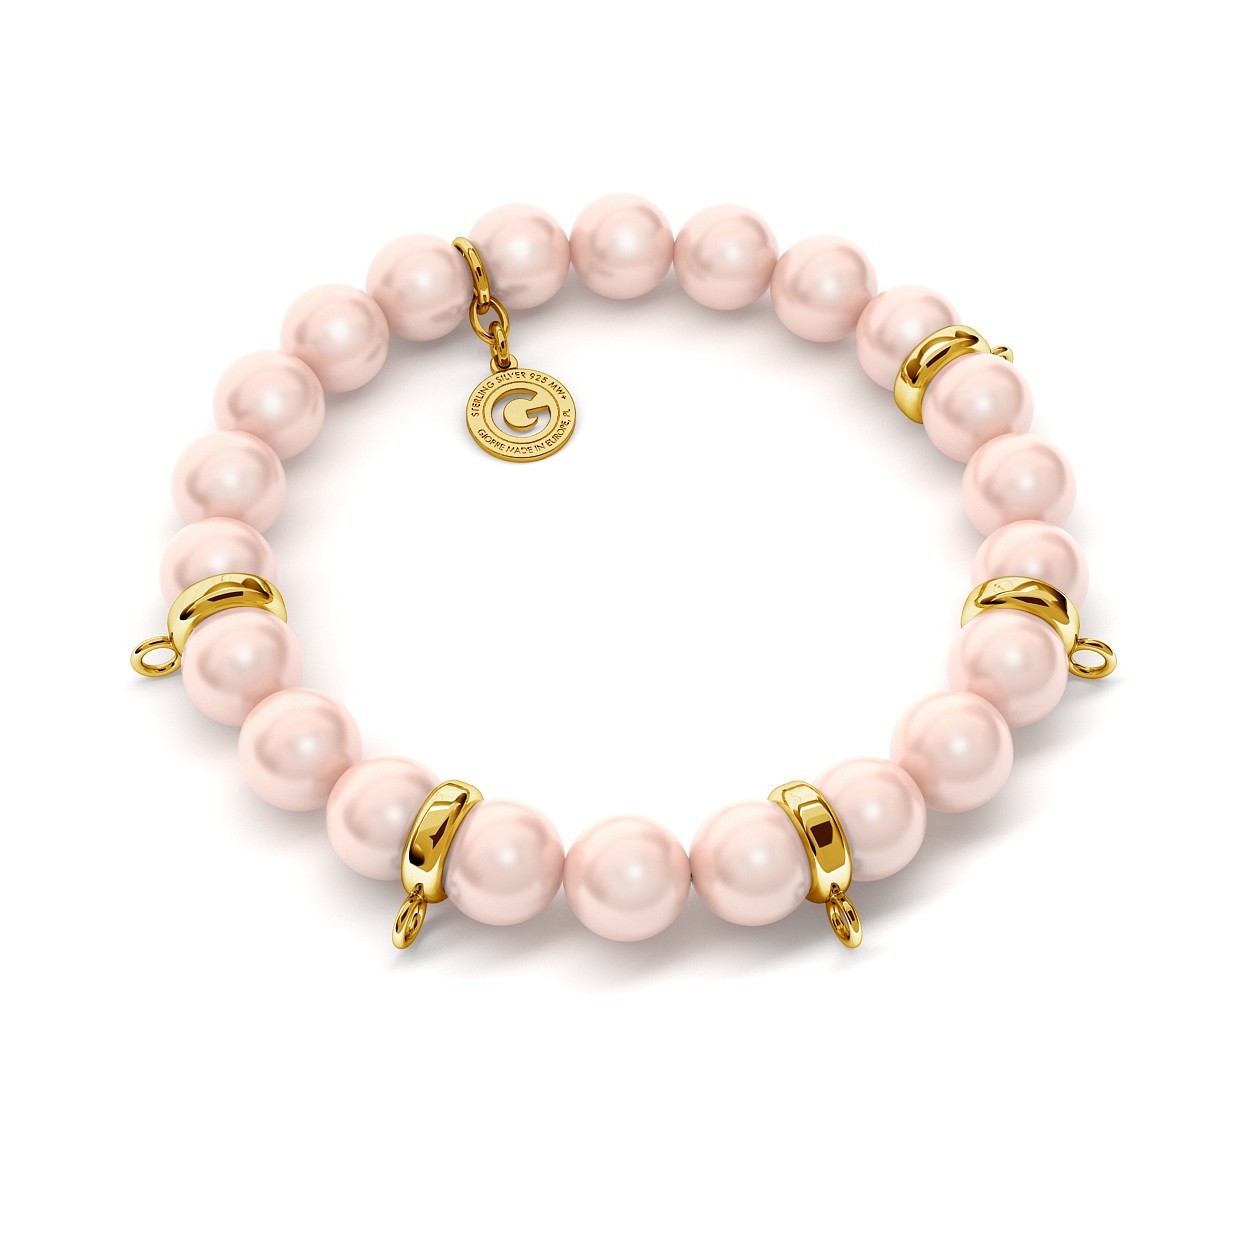 FLEXIBLE BRACELET WITH PEARLS (SWAROVSKI PEARL) FOR 5 CHARMS, SILVER 925, RHODIUM OR GOLD PLATED